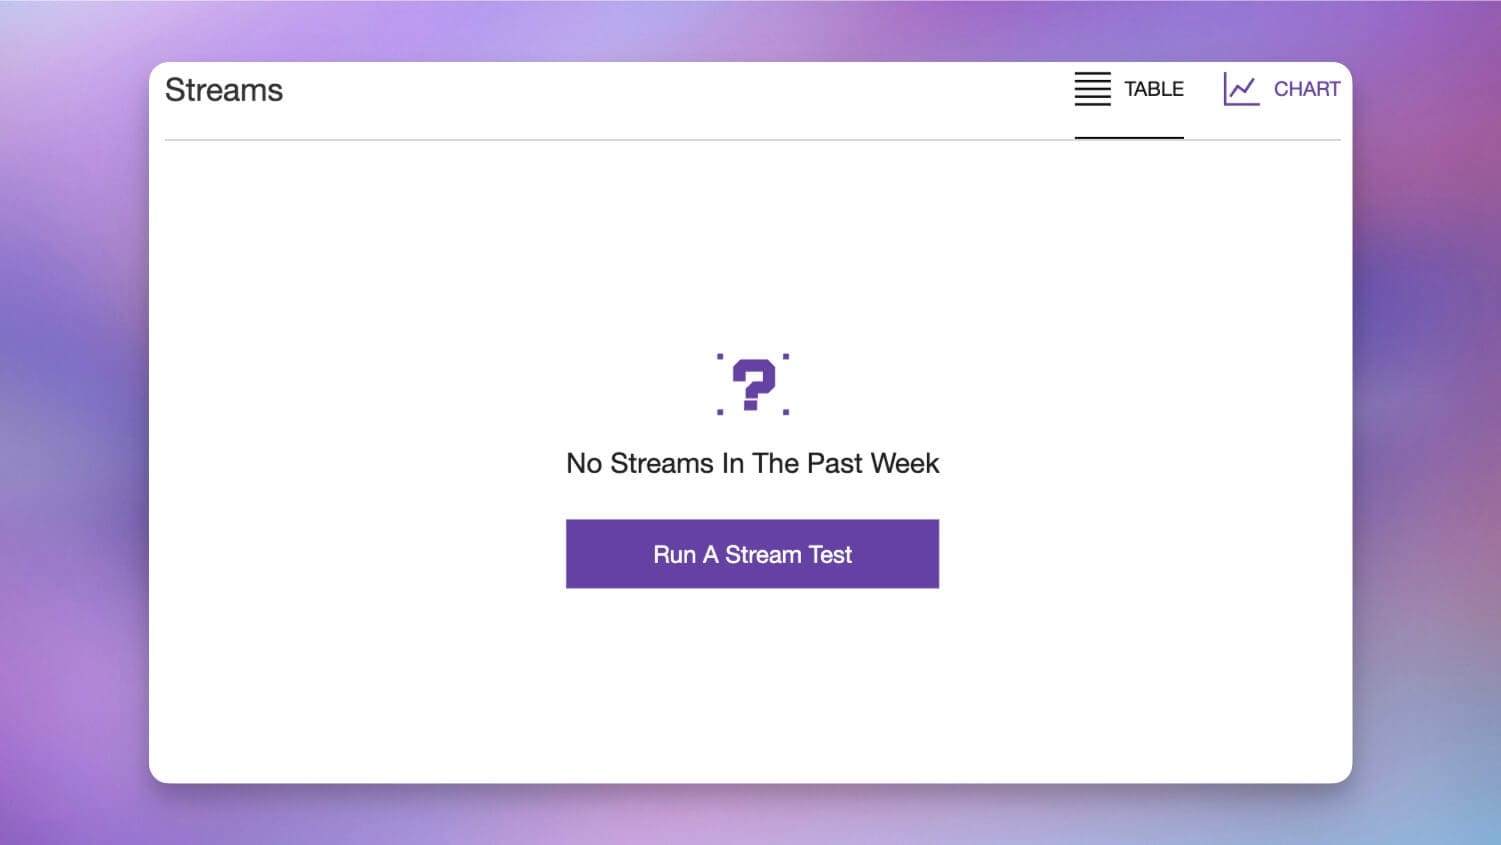 How to do a streaming test on Twitch